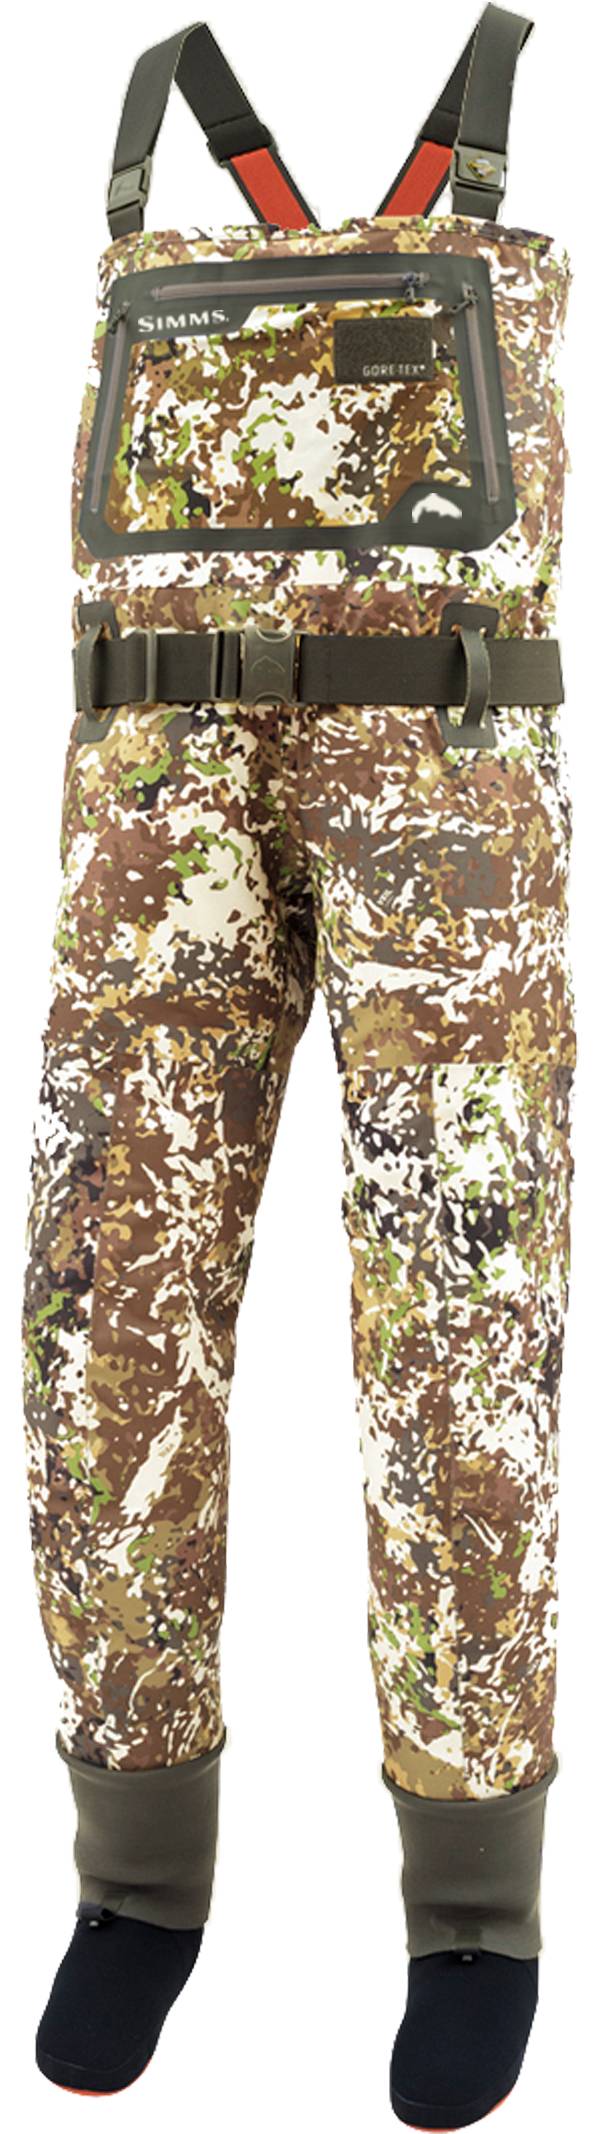 Simms G3 Guide Chest Waders